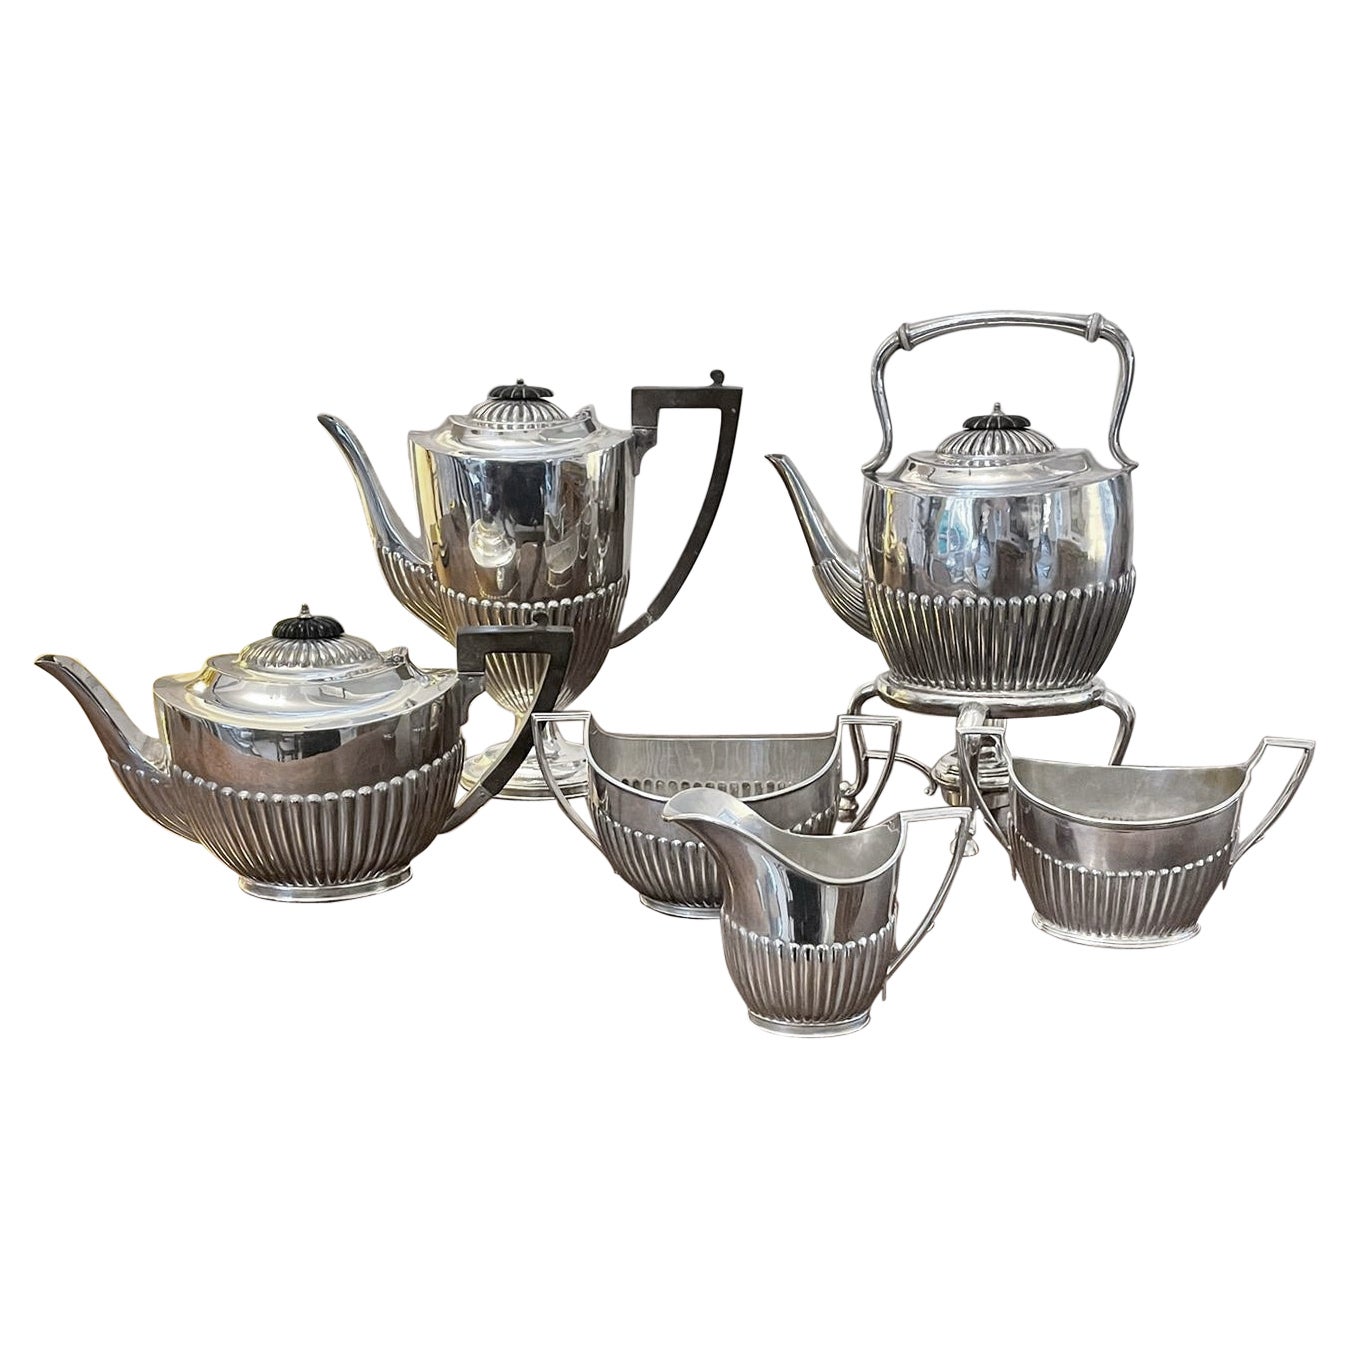 Unusual Antique Edwardian Quality Silver Plated 6 Piece Tea Set For Sale